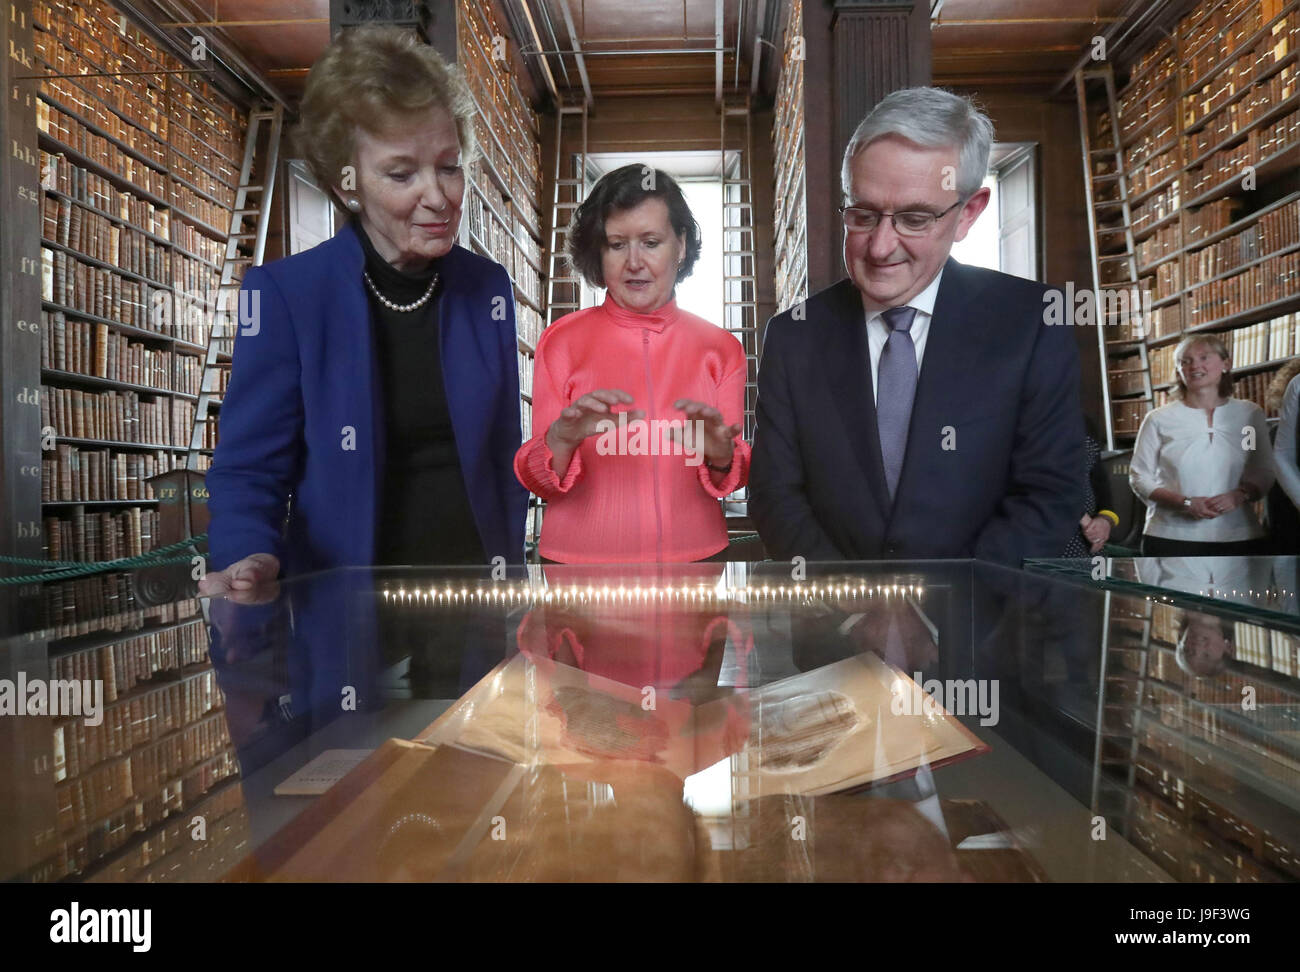 (left to right) Dr Mary Robinson Chancellor of the University of Dublin Trinity College, College Librarian and Archivist Helen Shenton and Bank of America Merrill Lynch Country Executive for Ireland Peter Keegan view Irish Manuscripts from the Dark Ages at their unveiling in the Long Room, Old Library, Trinity College Dublin. Stock Photo